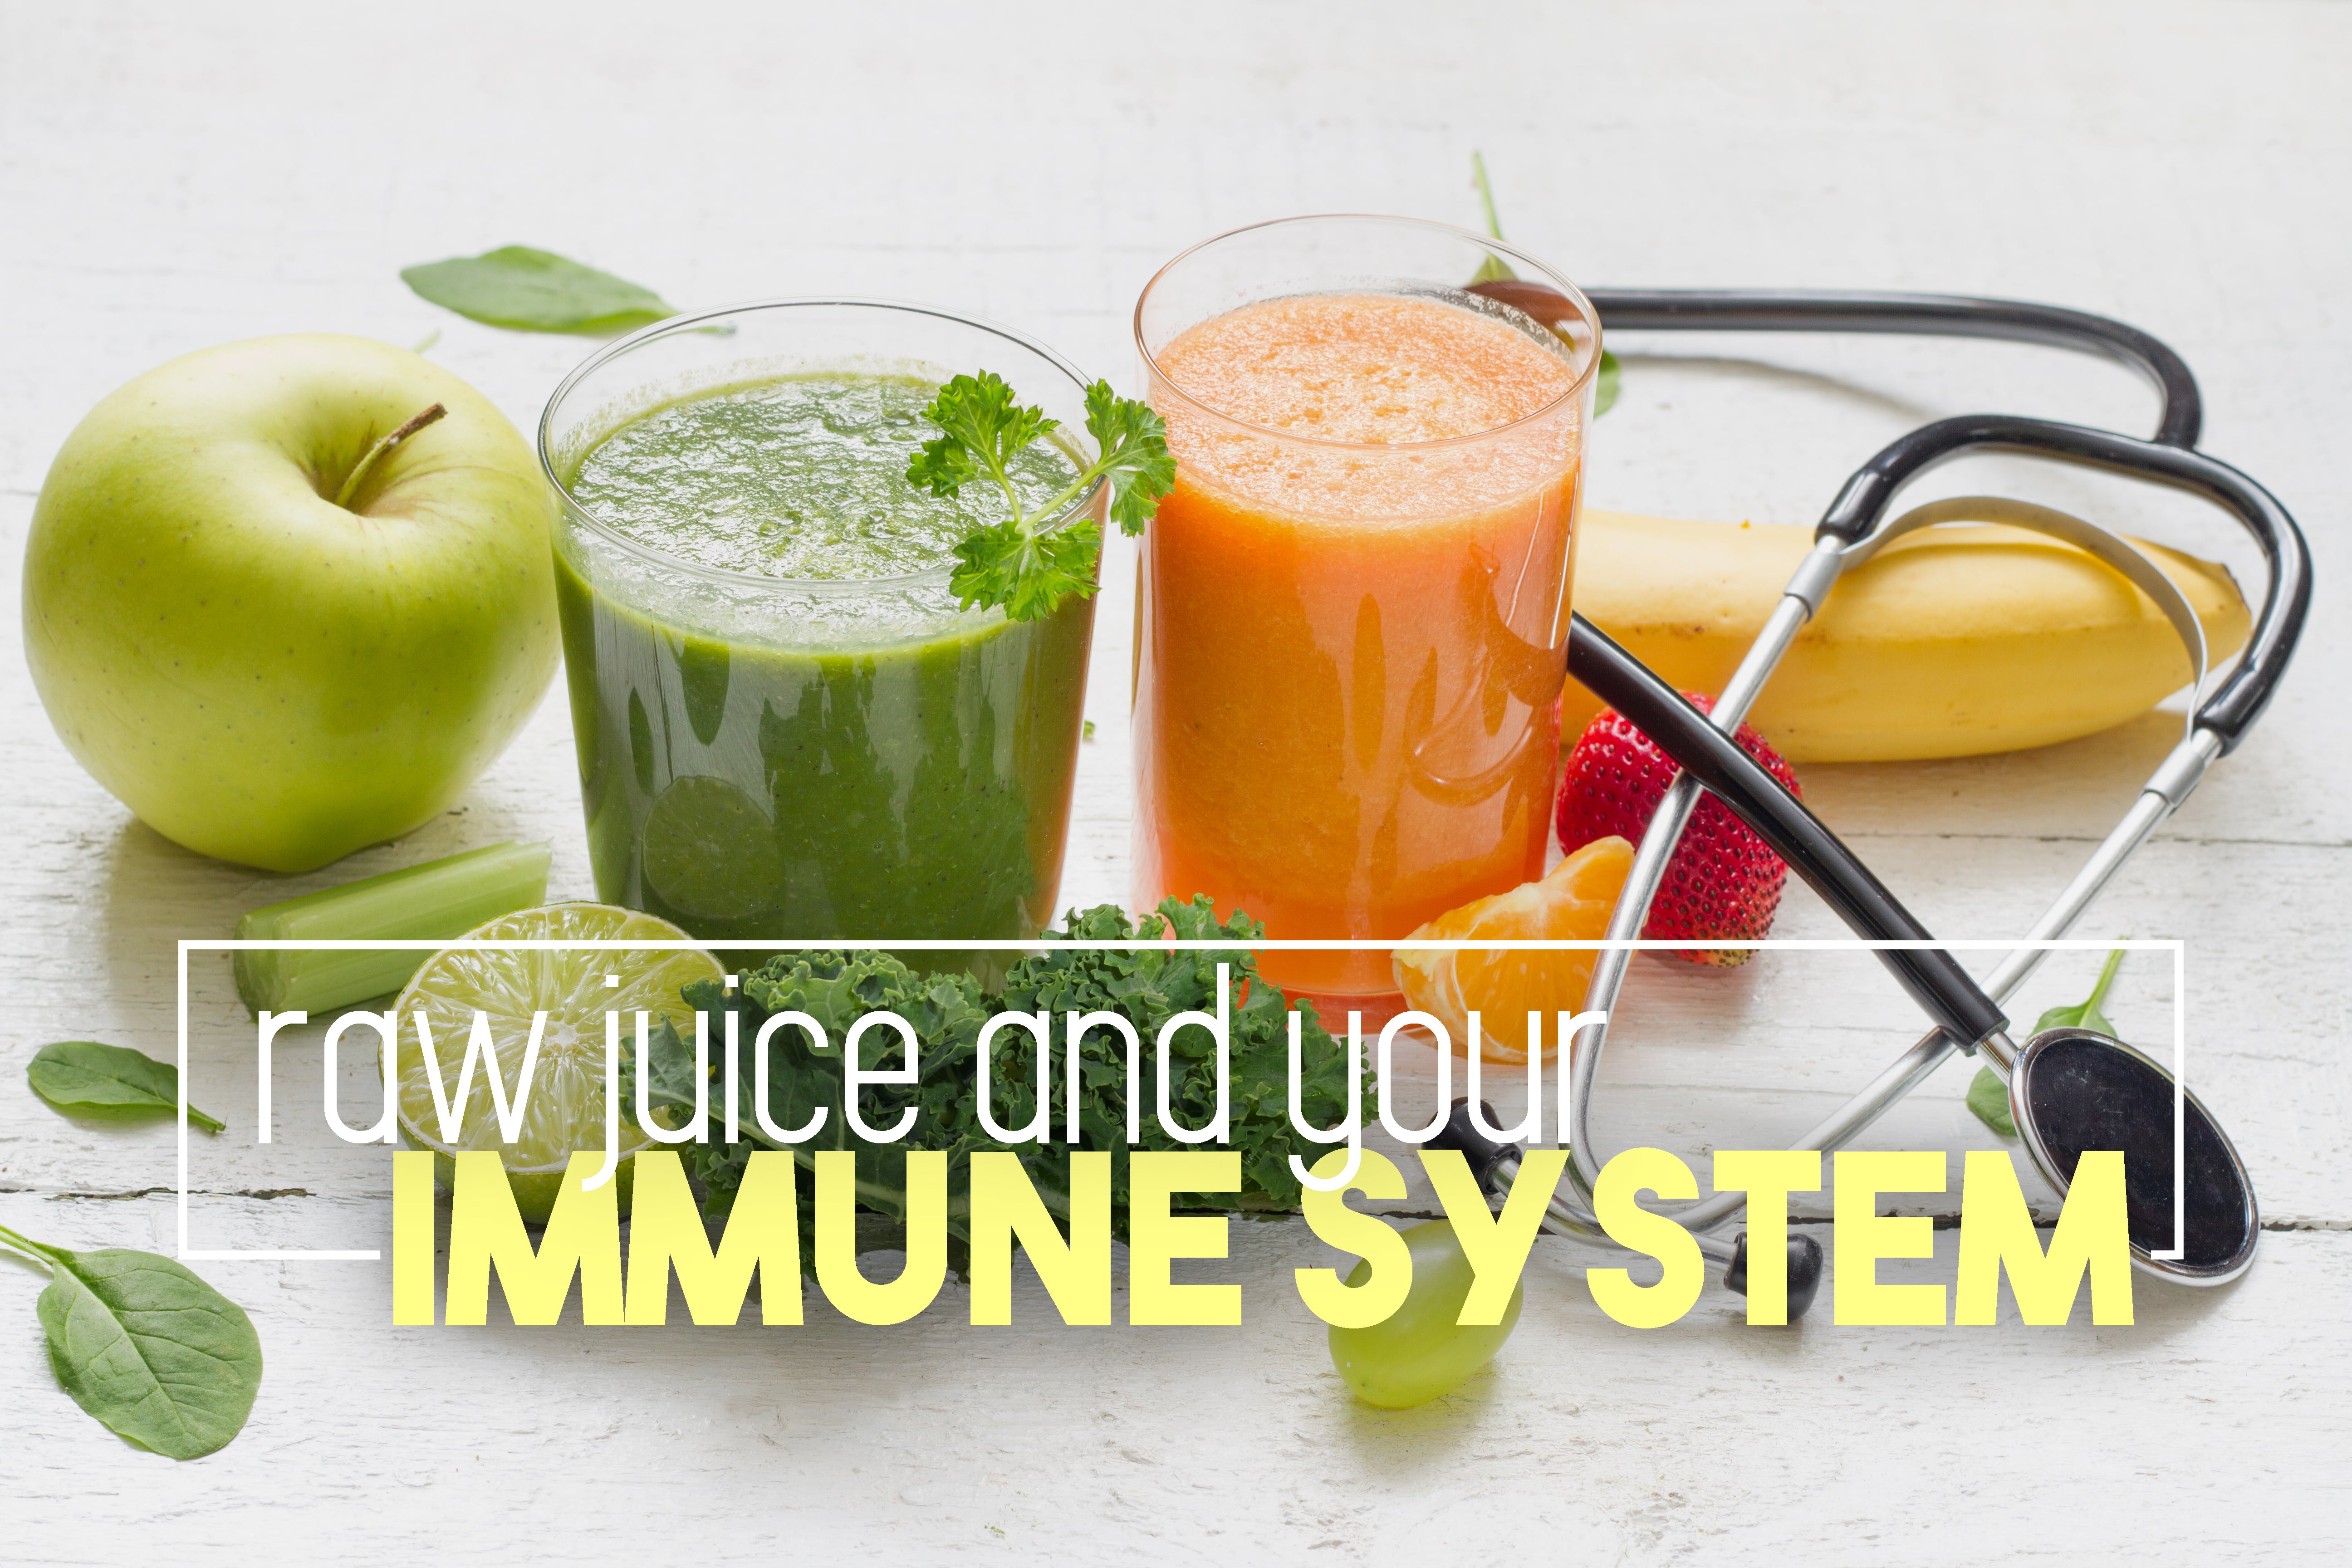 Raw Juice and Your Immune System